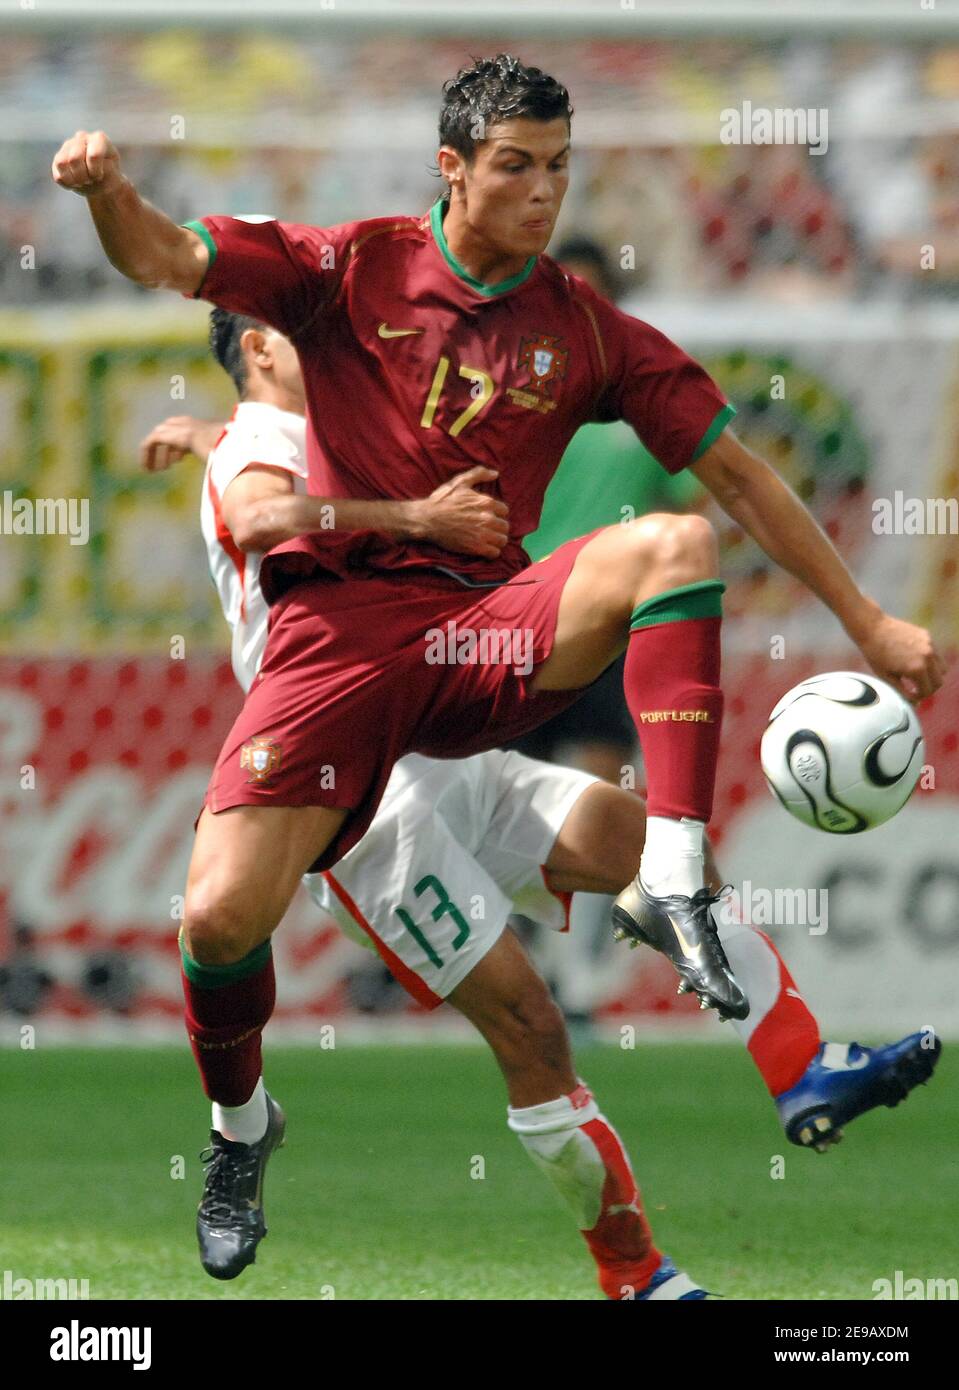 Portugal's Cristiano Ronaldo in action during the World Cup 2006, Portugal vs Iran at the Fifa World Cup Stadium in Frankfurt, Germany on June 17, 2006. Portugal won 2-0. Photo by Gouhier-Hahn-Orban/Cameleon/ABACAPRESS.COM Stock Photo